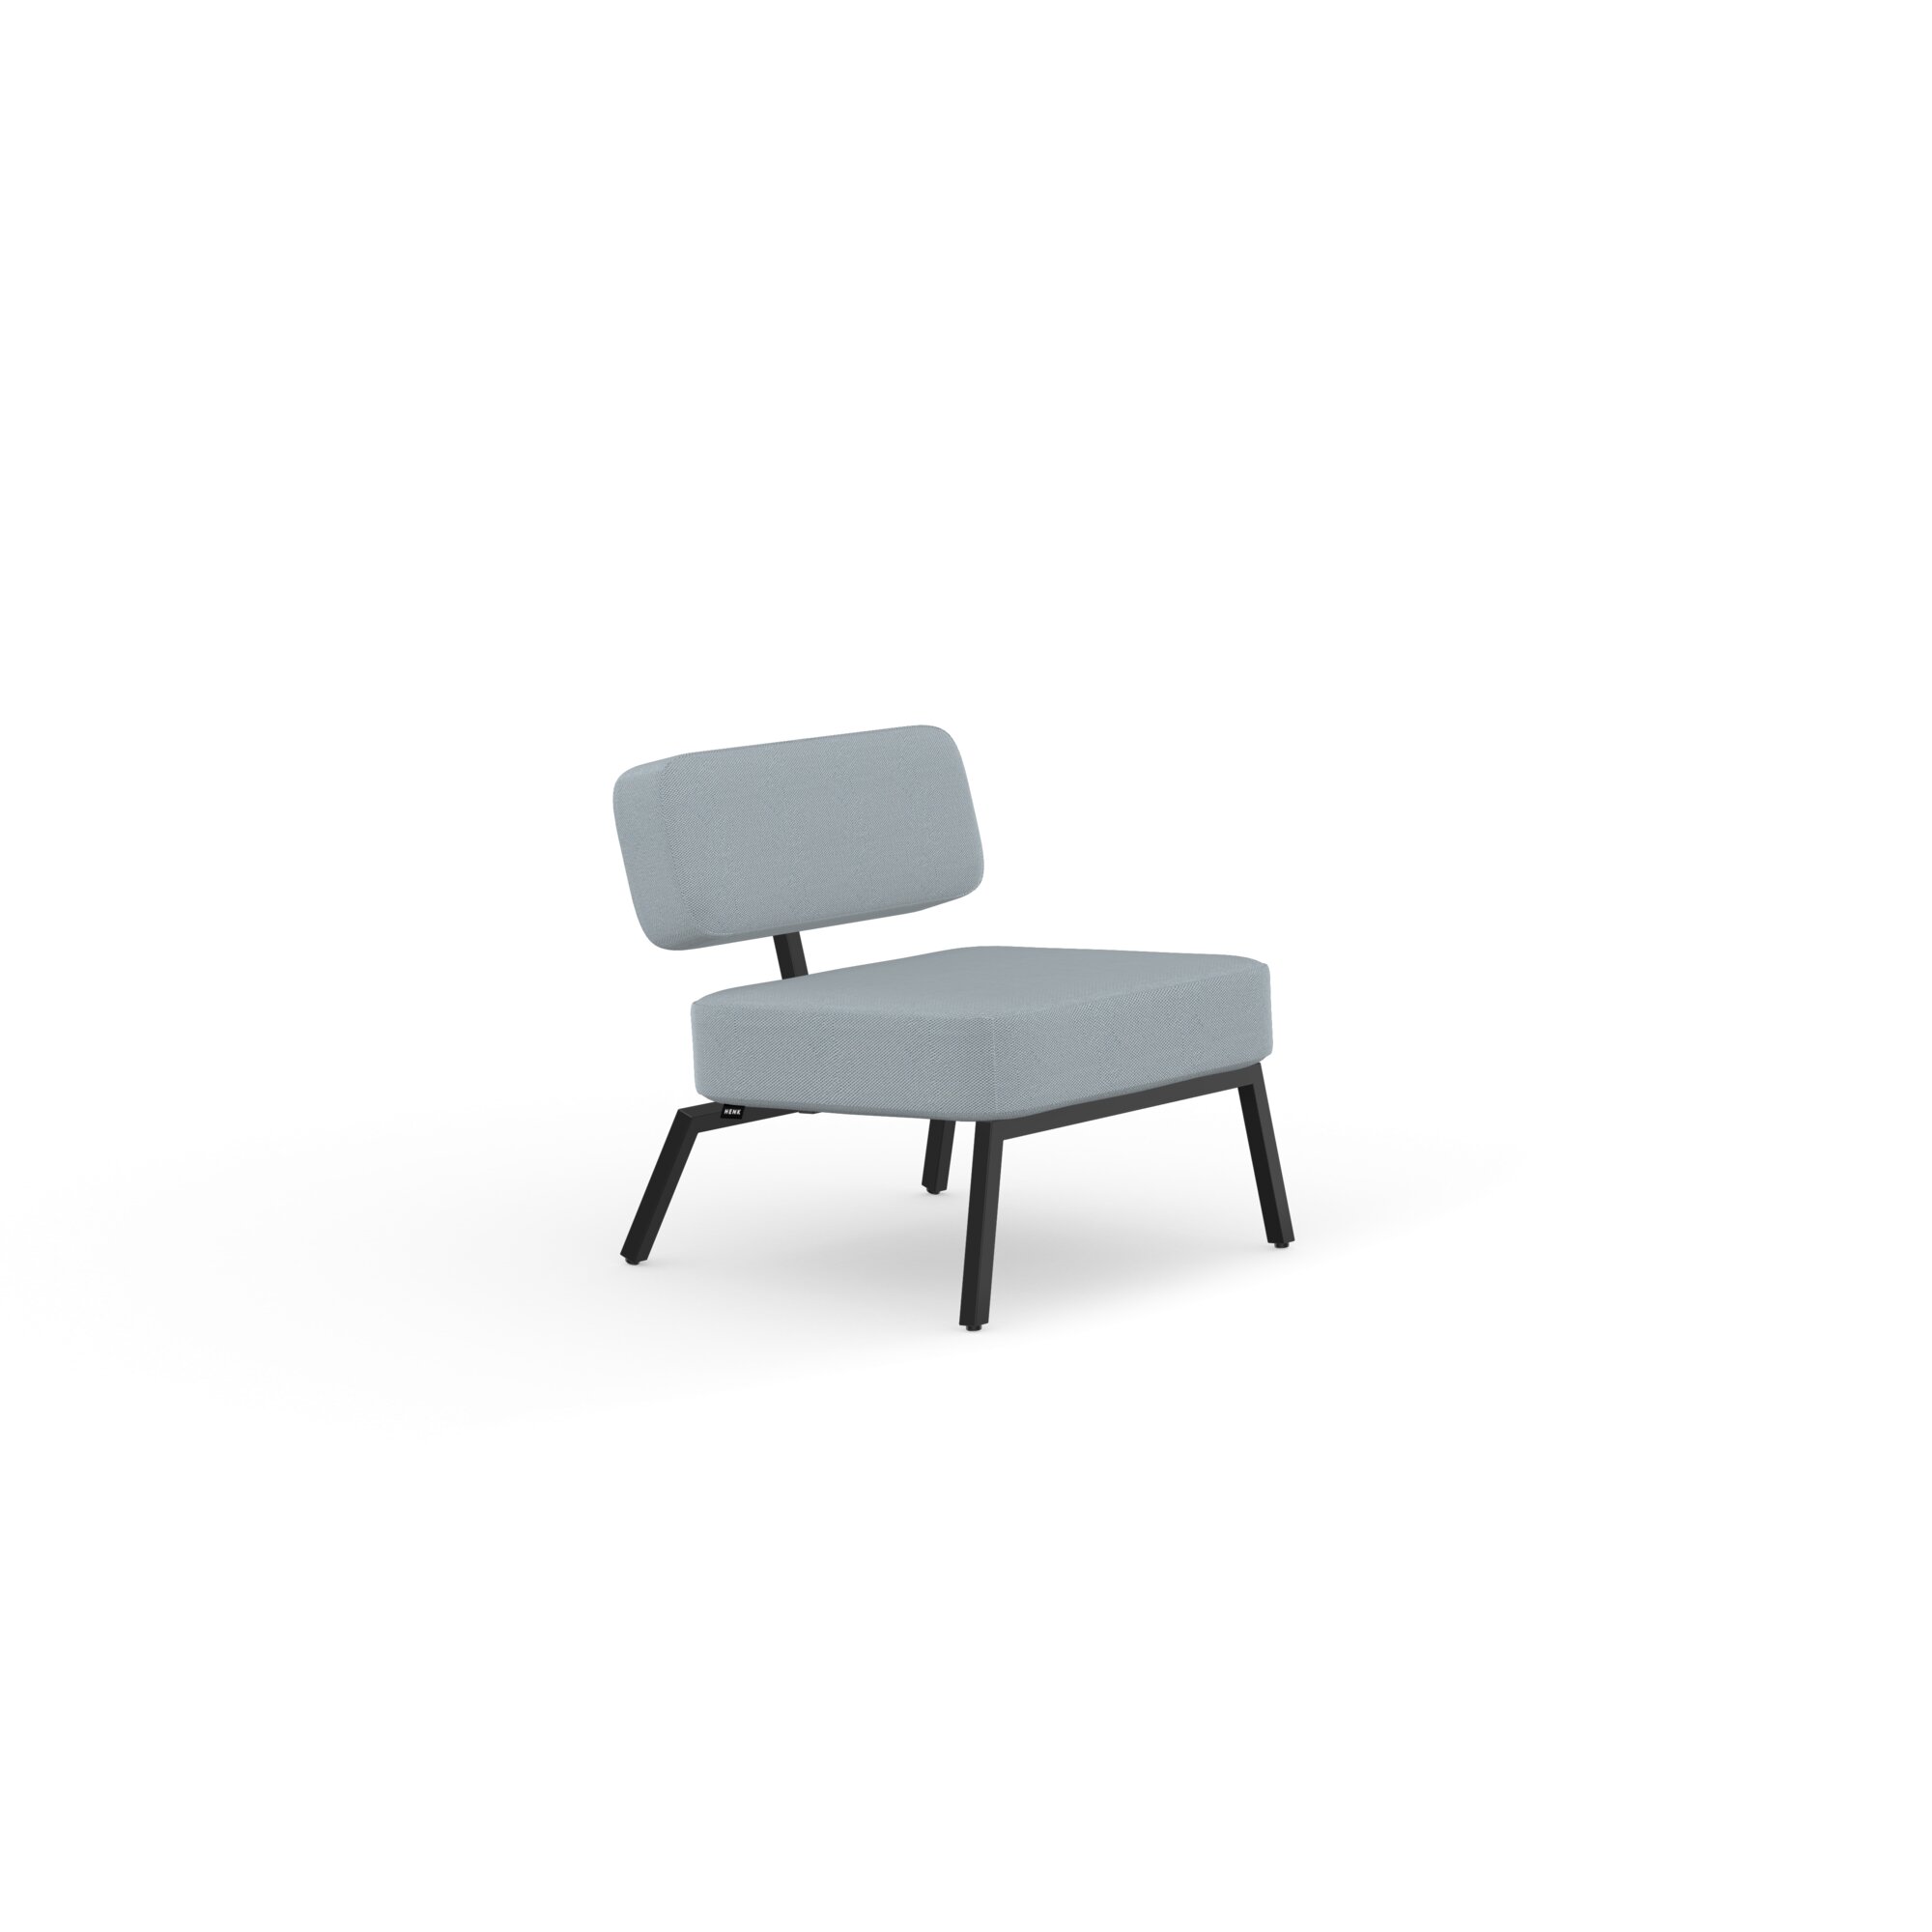 Design modern sofa | Ode lounge chair 1 seater without armrest  Light Blue steelcuttrio3 713 | Studio HENK| 